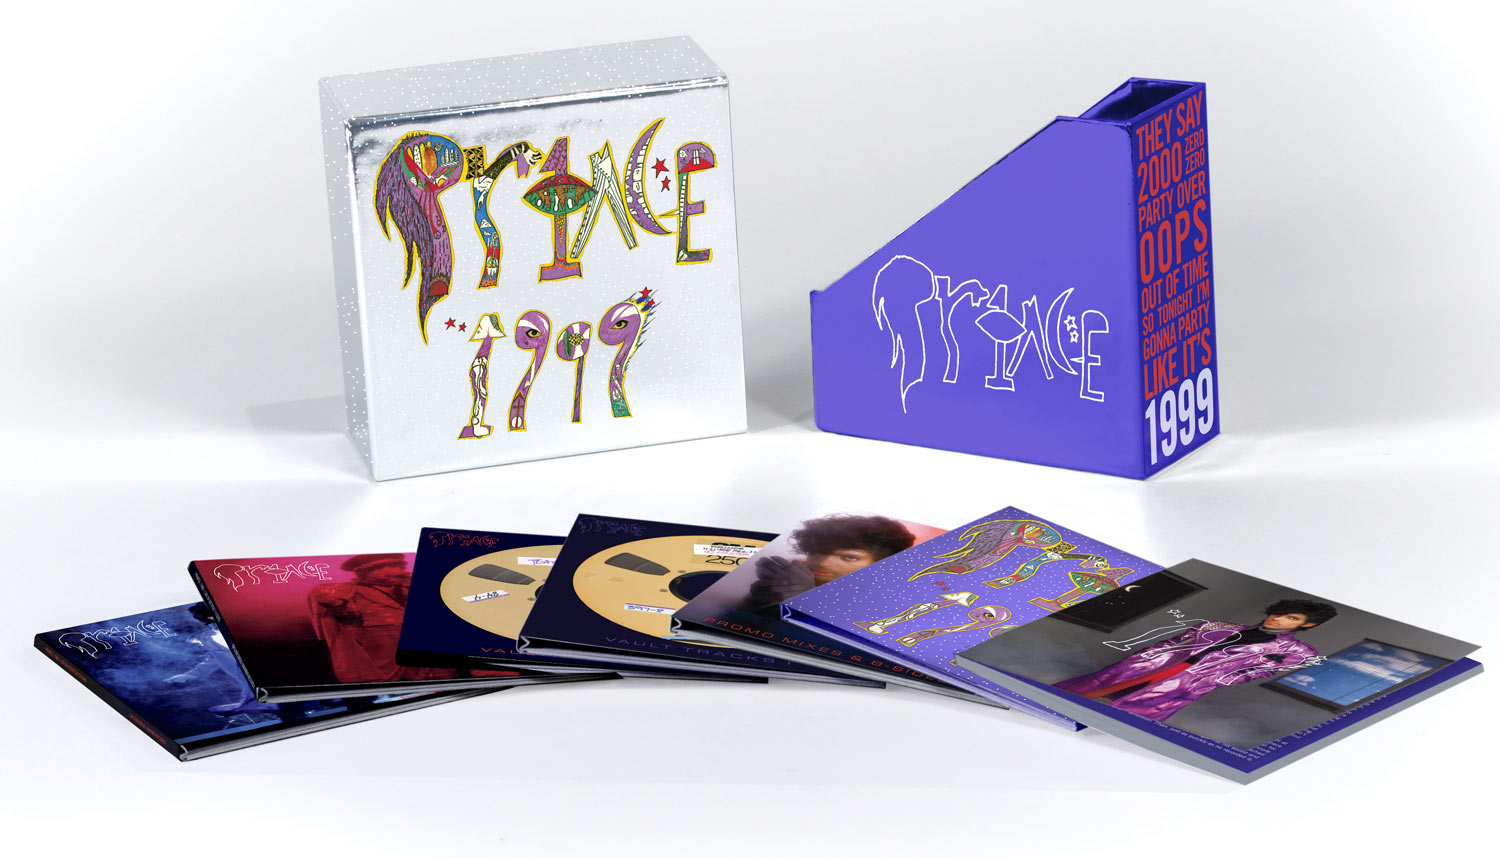 Prince 1999 Super Deluxe Reissue Offers A Wealth Of Unreleased Material Superdeluxeedition